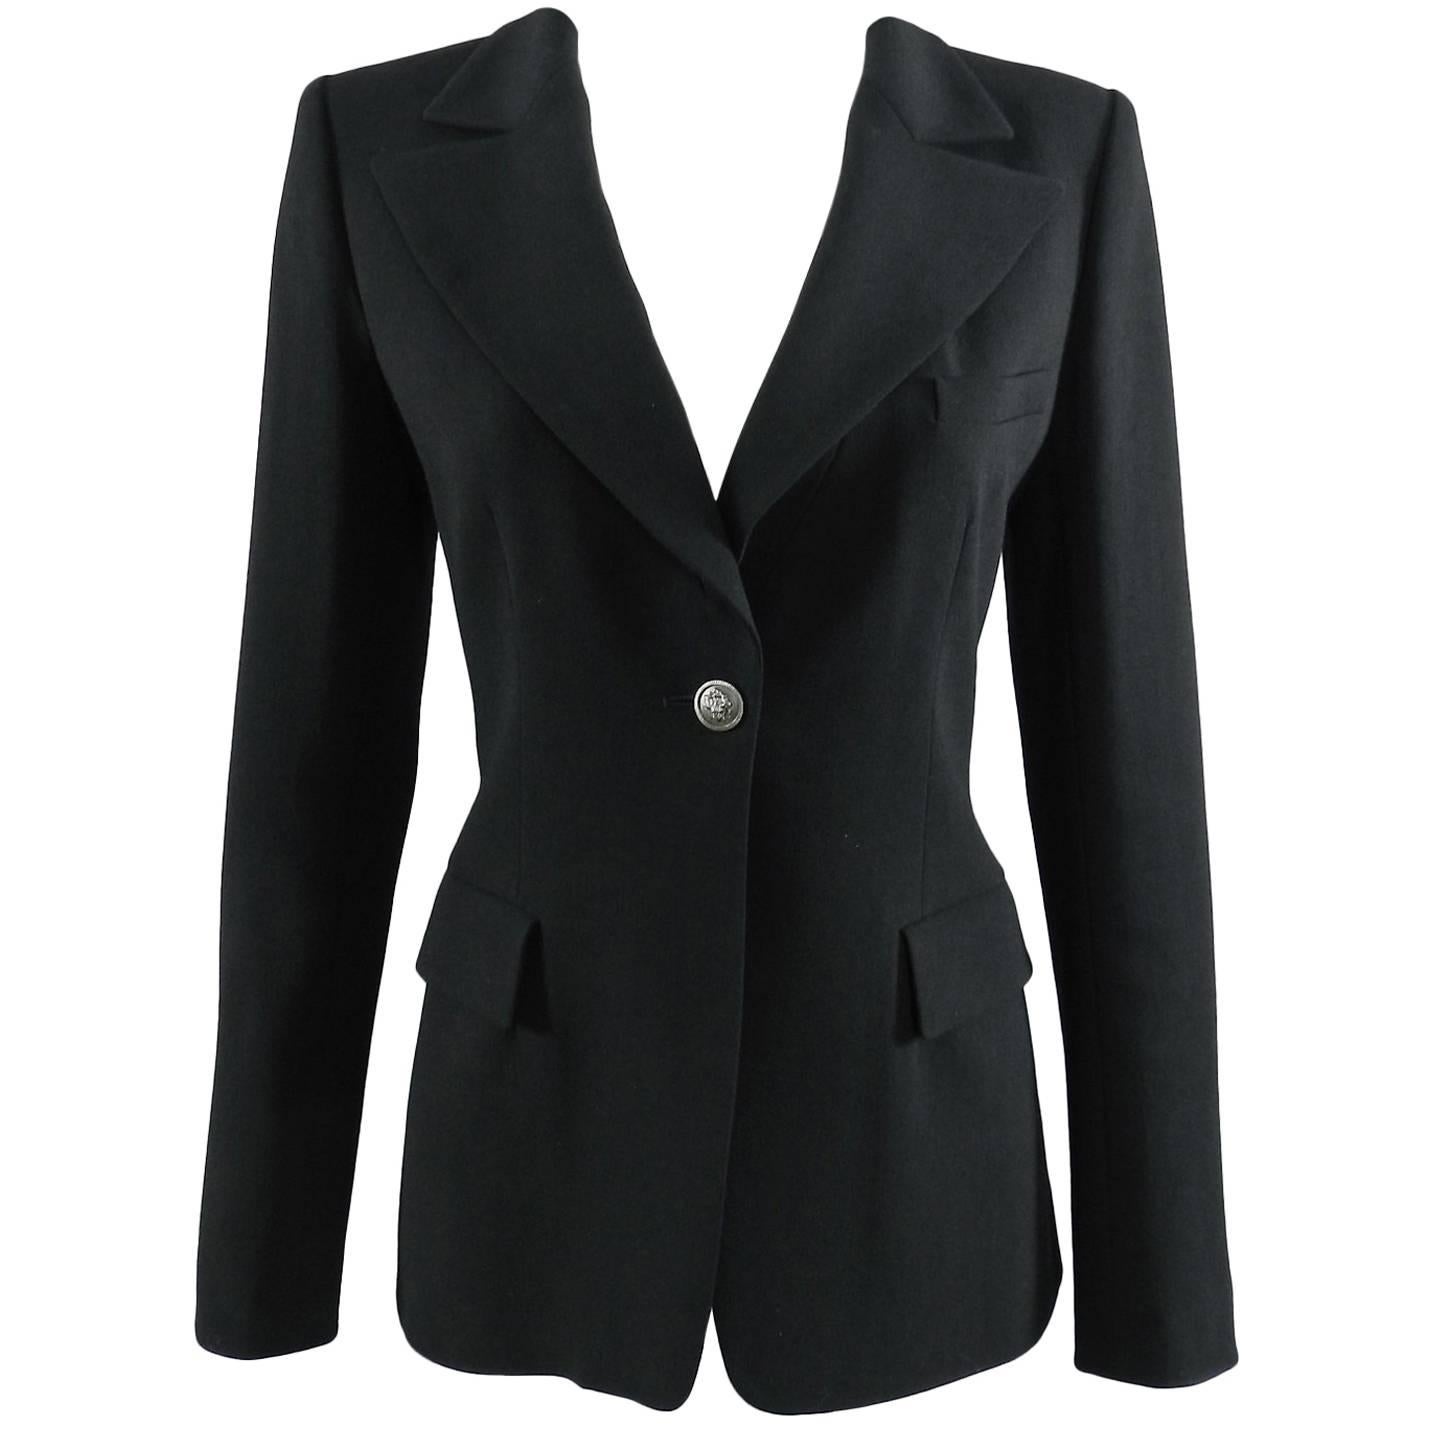 CHANEL 08A Fall 2008 Classic Black Wool Blazer Jacket with Lion Button